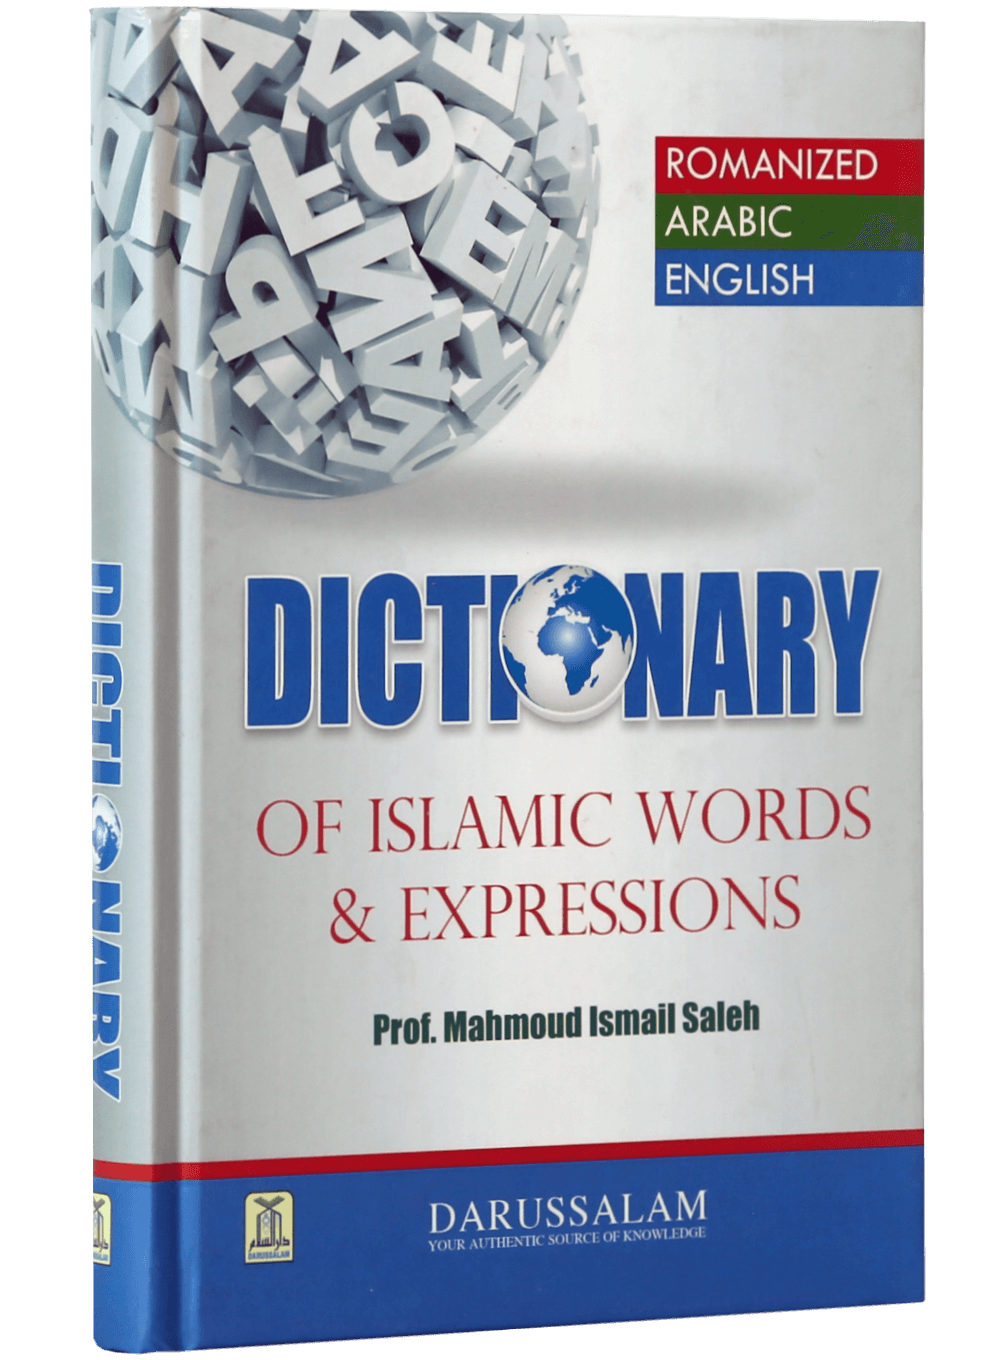 darussalam-2017-10-03-12-02-20dictionary-of-islamic-words-and-expressions-(2)